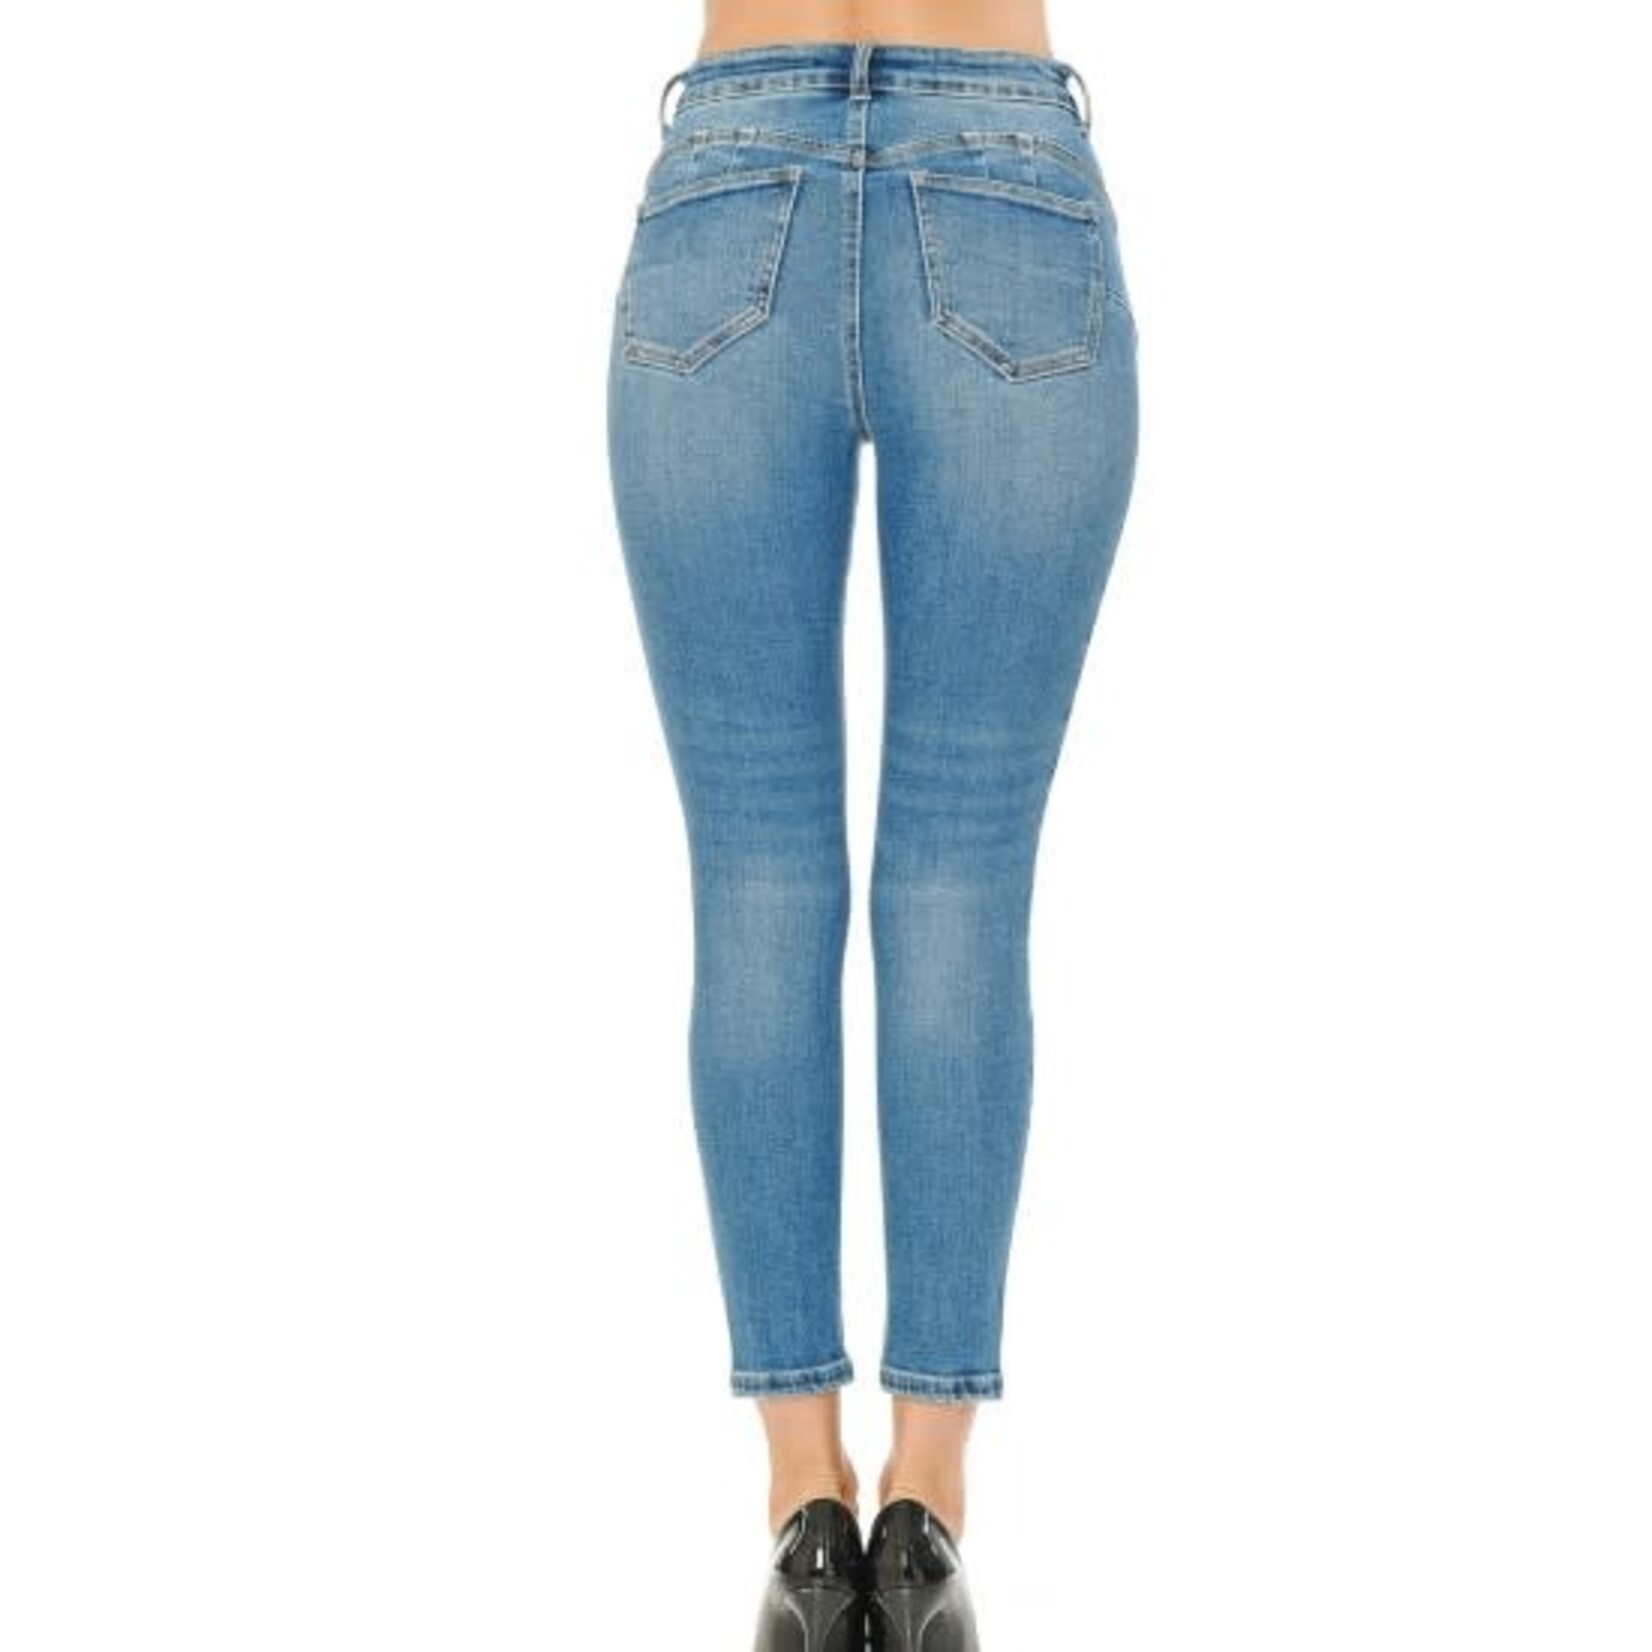 Wax Jeans Wax Jeans - Push-Up Vintage Classic 5 Pocket Ankle Jeans - 90800